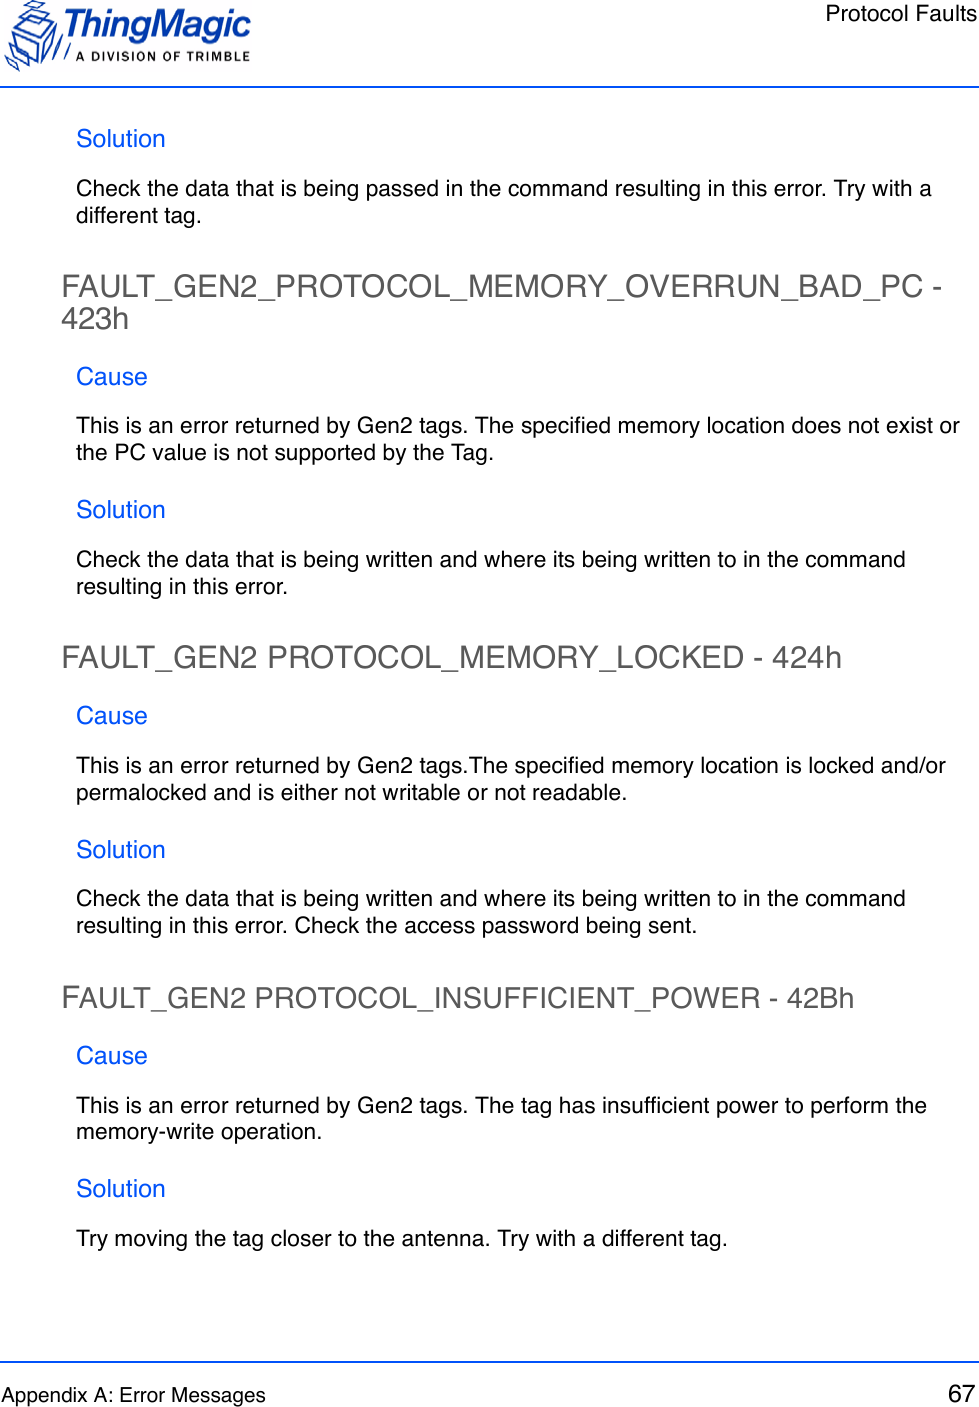 Protocol FaultsAppendix A: Error Messages 67SolutionCheck the data that is being passed in the command resulting in this error. Try with a different tag.FAULT_GEN2_PROTOCOL_MEMORY_OVERRUN_BAD_PC - 423hCauseThis is an error returned by Gen2 tags. The specified memory location does not exist or the PC value is not supported by the Tag. SolutionCheck the data that is being written and where its being written to in the command resulting in this error.FAULT_GEN2 PROTOCOL_MEMORY_LOCKED - 424hCauseThis is an error returned by Gen2 tags.The specified memory location is locked and/or permalocked and is either not writable or not readable.SolutionCheck the data that is being written and where its being written to in the command resulting in this error. Check the access password being sent.FAULT_GEN2 PROTOCOL_INSUFFICIENT_POWER - 42BhCauseThis is an error returned by Gen2 tags. The tag has insufficient power to perform the memory-write operation.SolutionTry moving the tag closer to the antenna. Try with a different tag.